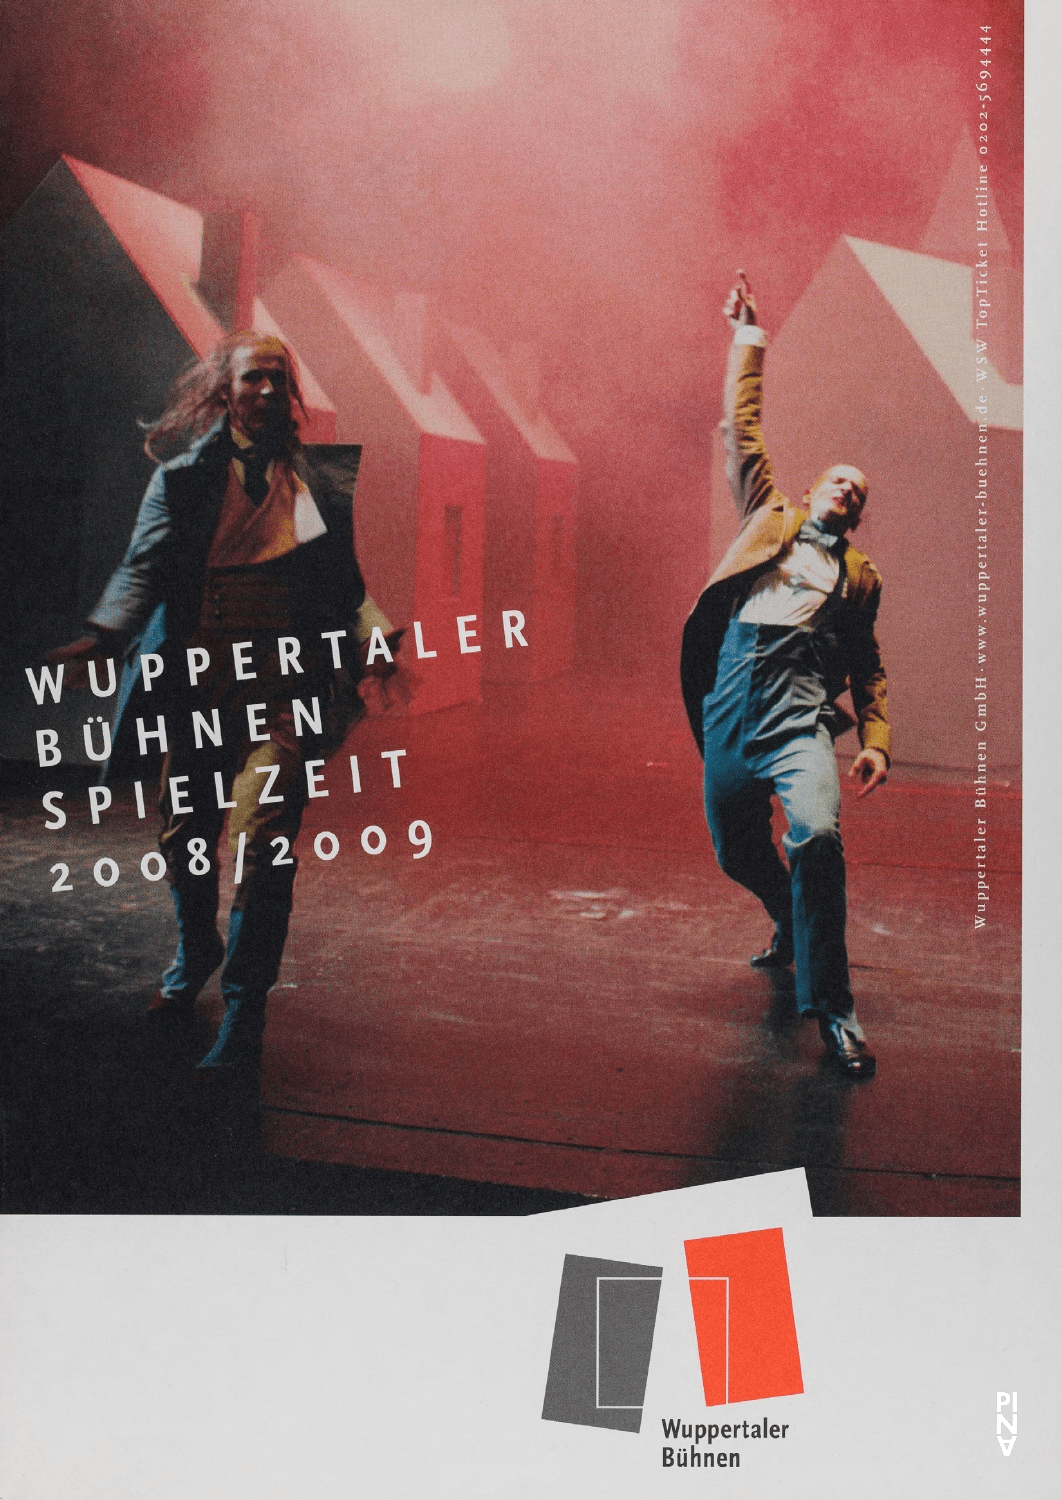 Season programme for “Bamboo Blues”, “Nelken (Carnations)”, “Vollmond (Full Moon)” and more by Pina Bausch with Tanztheater Wuppertal, “Kontakthof. With Teenagers over 14” by Pina Bausch with Kontakthof-Ensemble Teenager ab ´14 and “Kontakthof. With Ladies and Gentlemen over 65” by Pina Bausch with Kontakthof-Ensemble Damen und Herren ab ´65 in in Wuppertal, 10/02/2008 – 06/21/2009